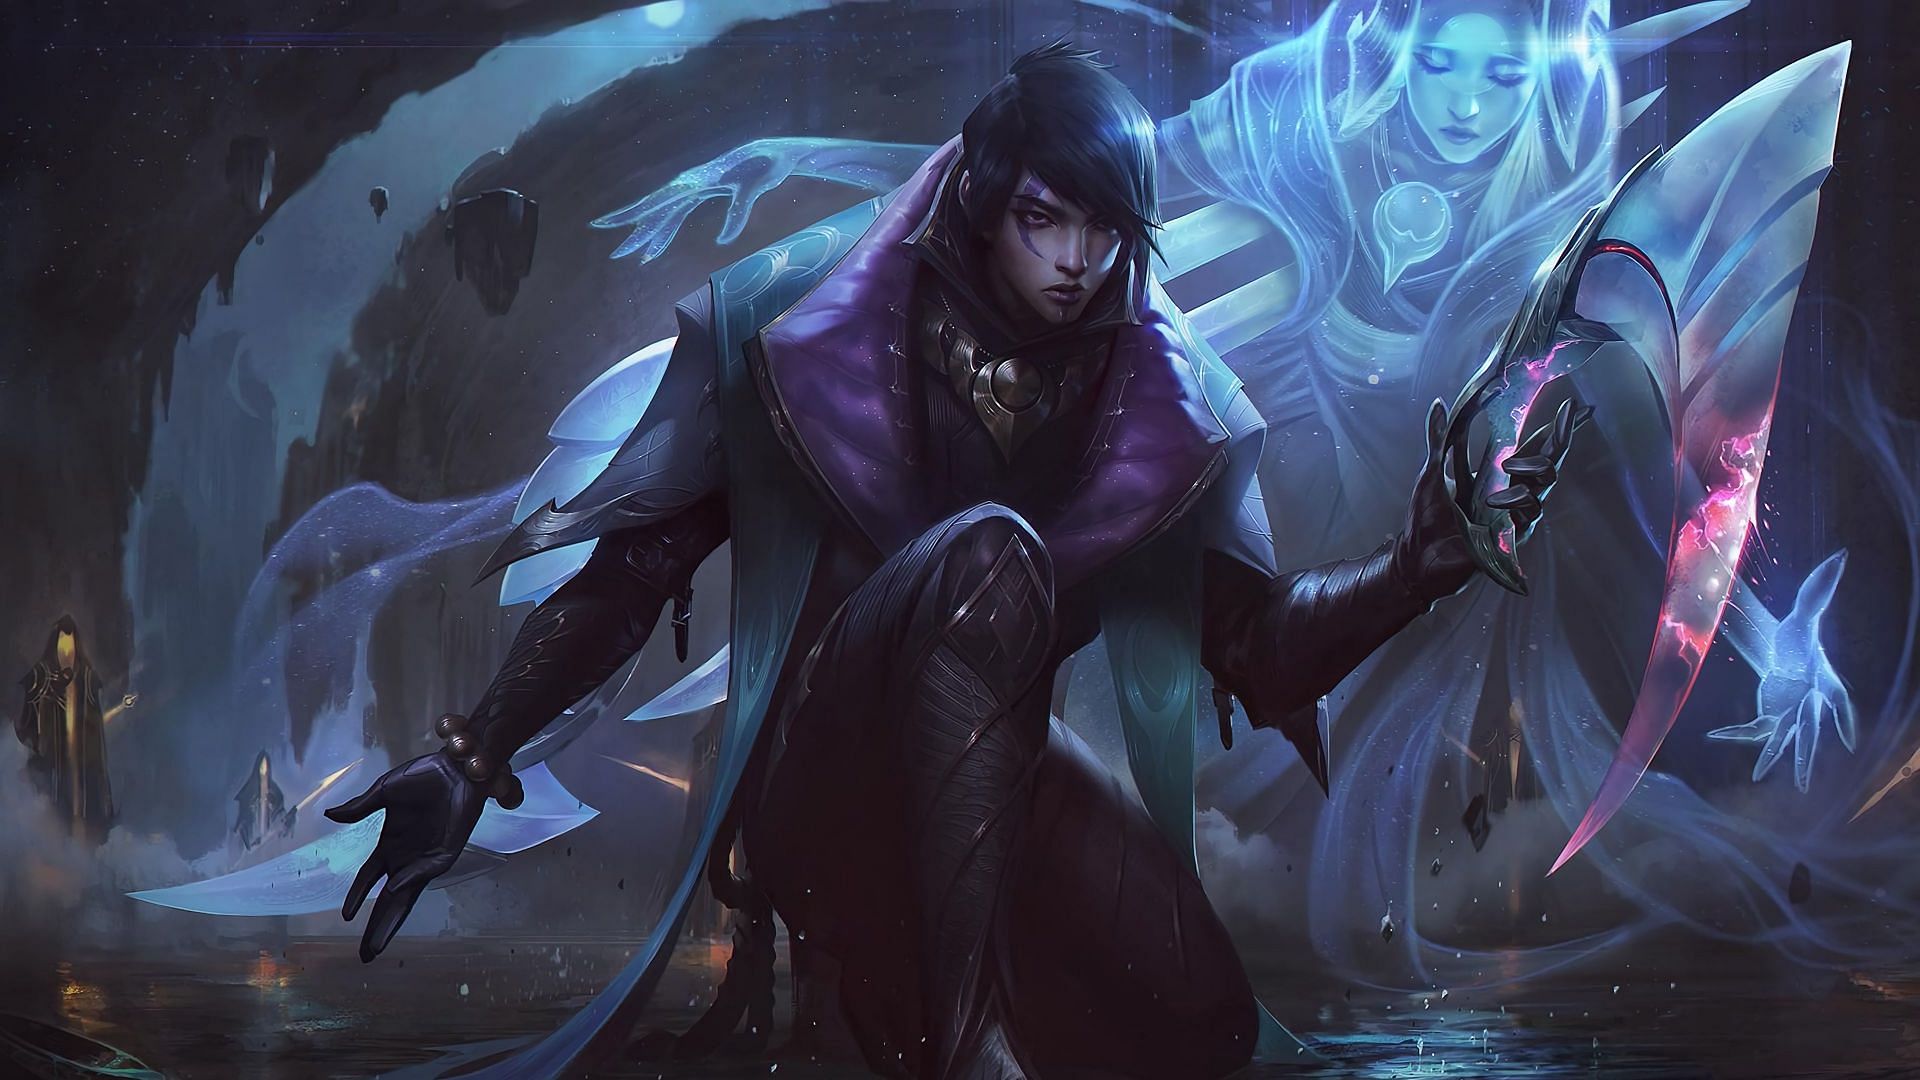 Alune and Aphelios are connected through the mind, and that is why Alune looks like a ghastly figure (Image via League of Legends)